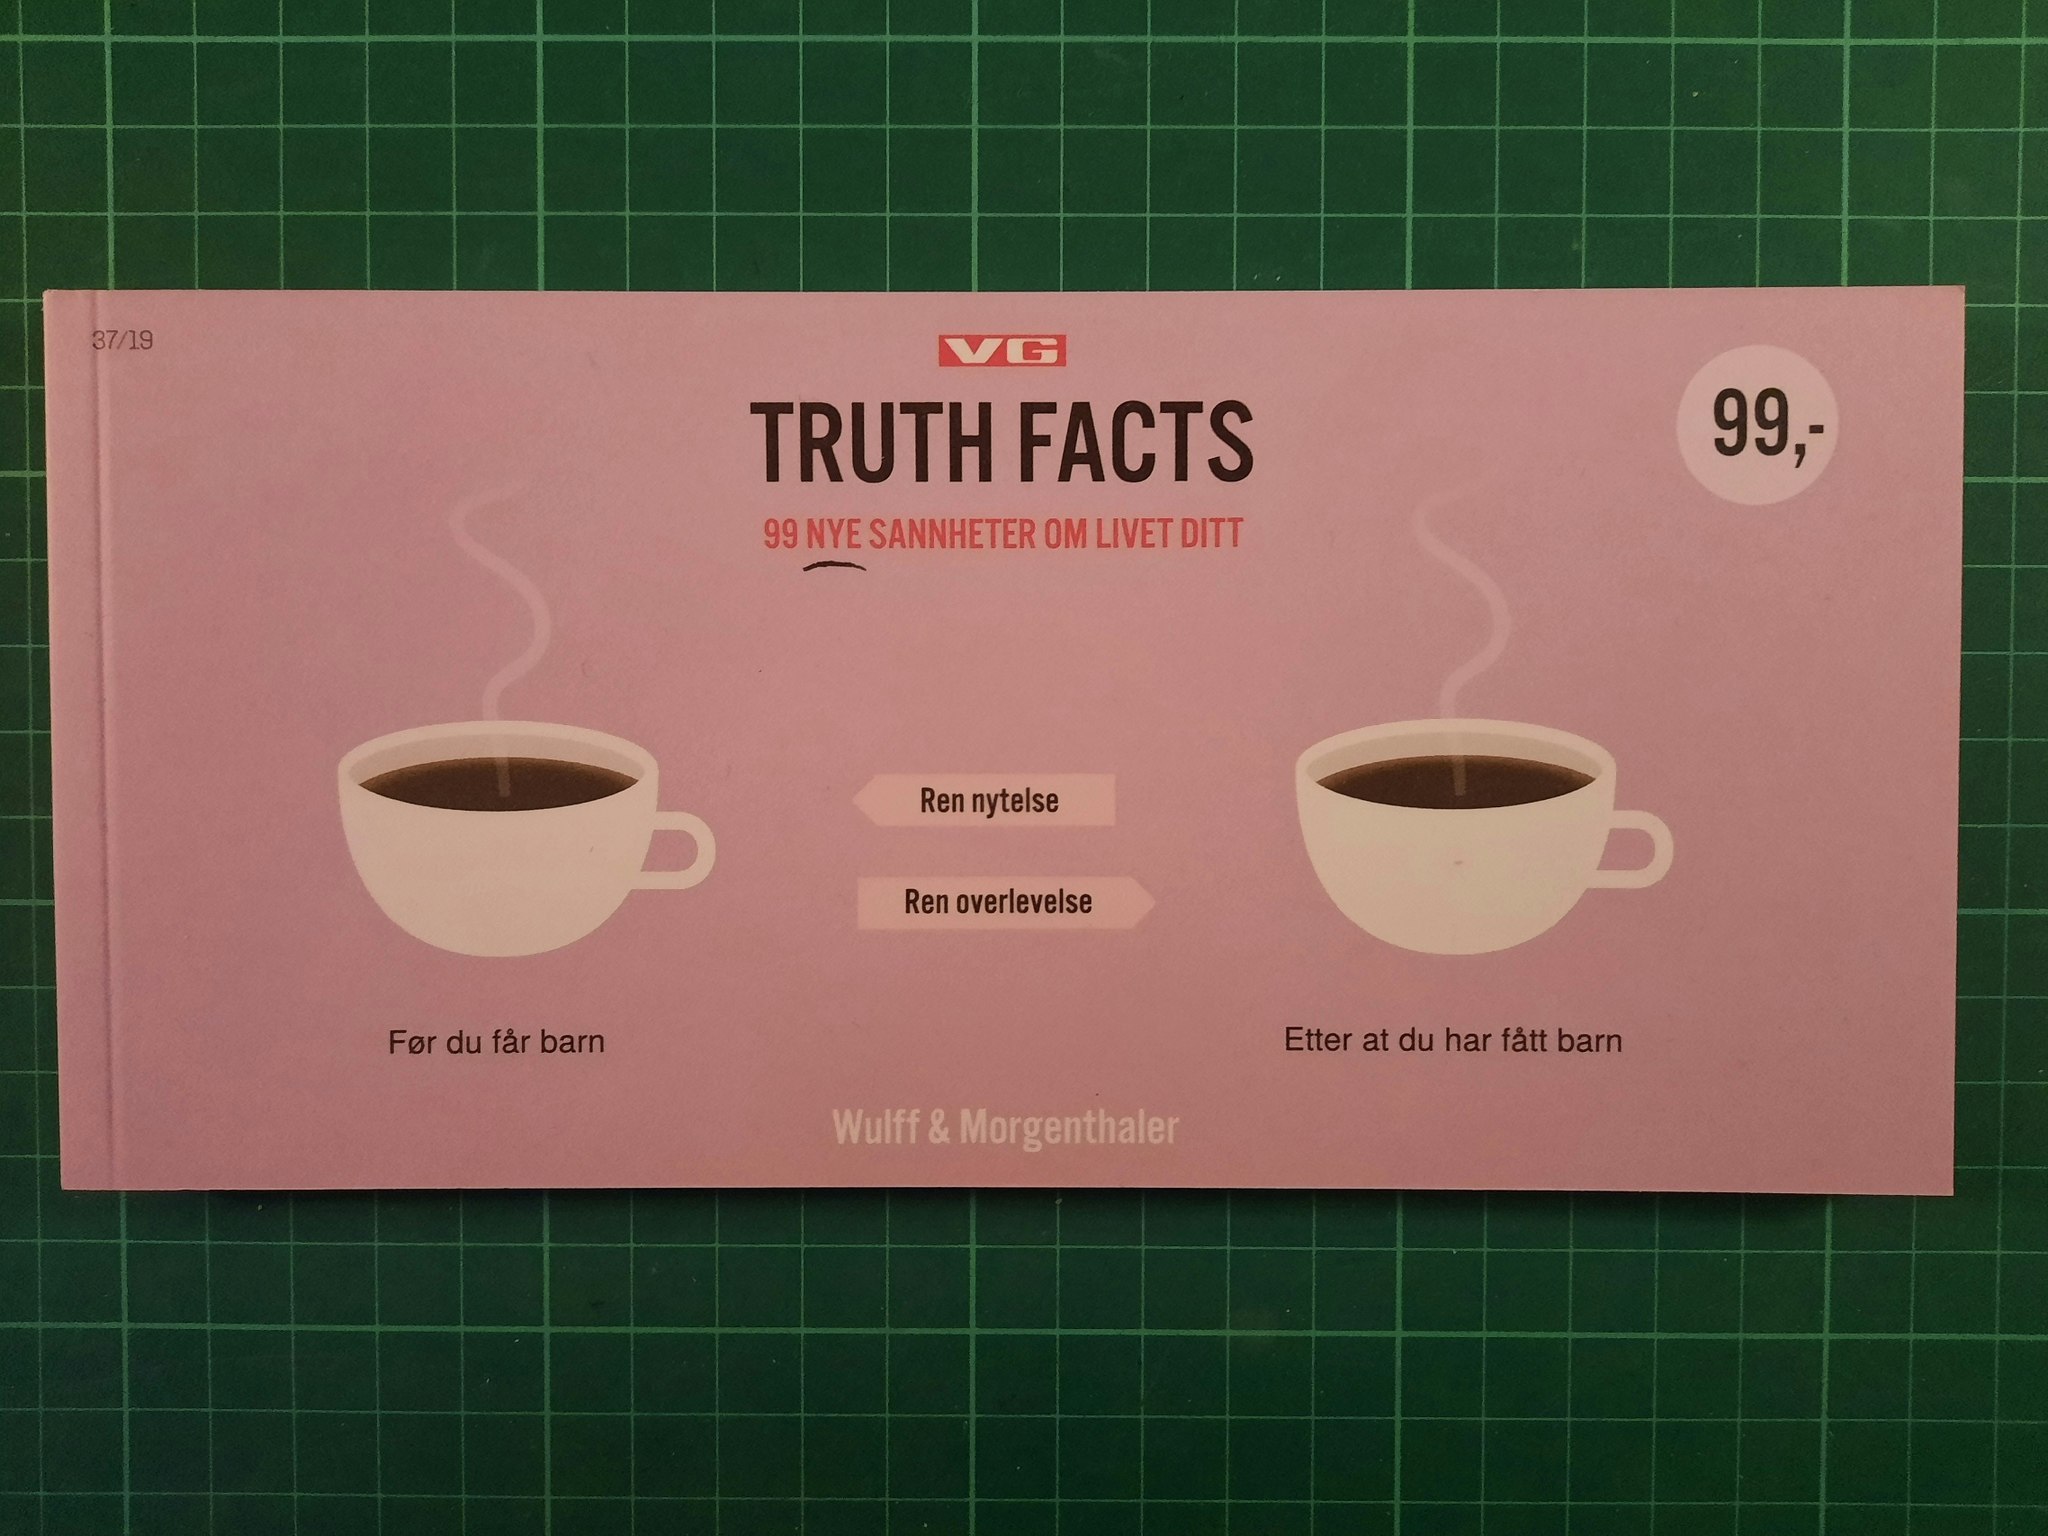 Wulff & Morgenthaler : Truth facts